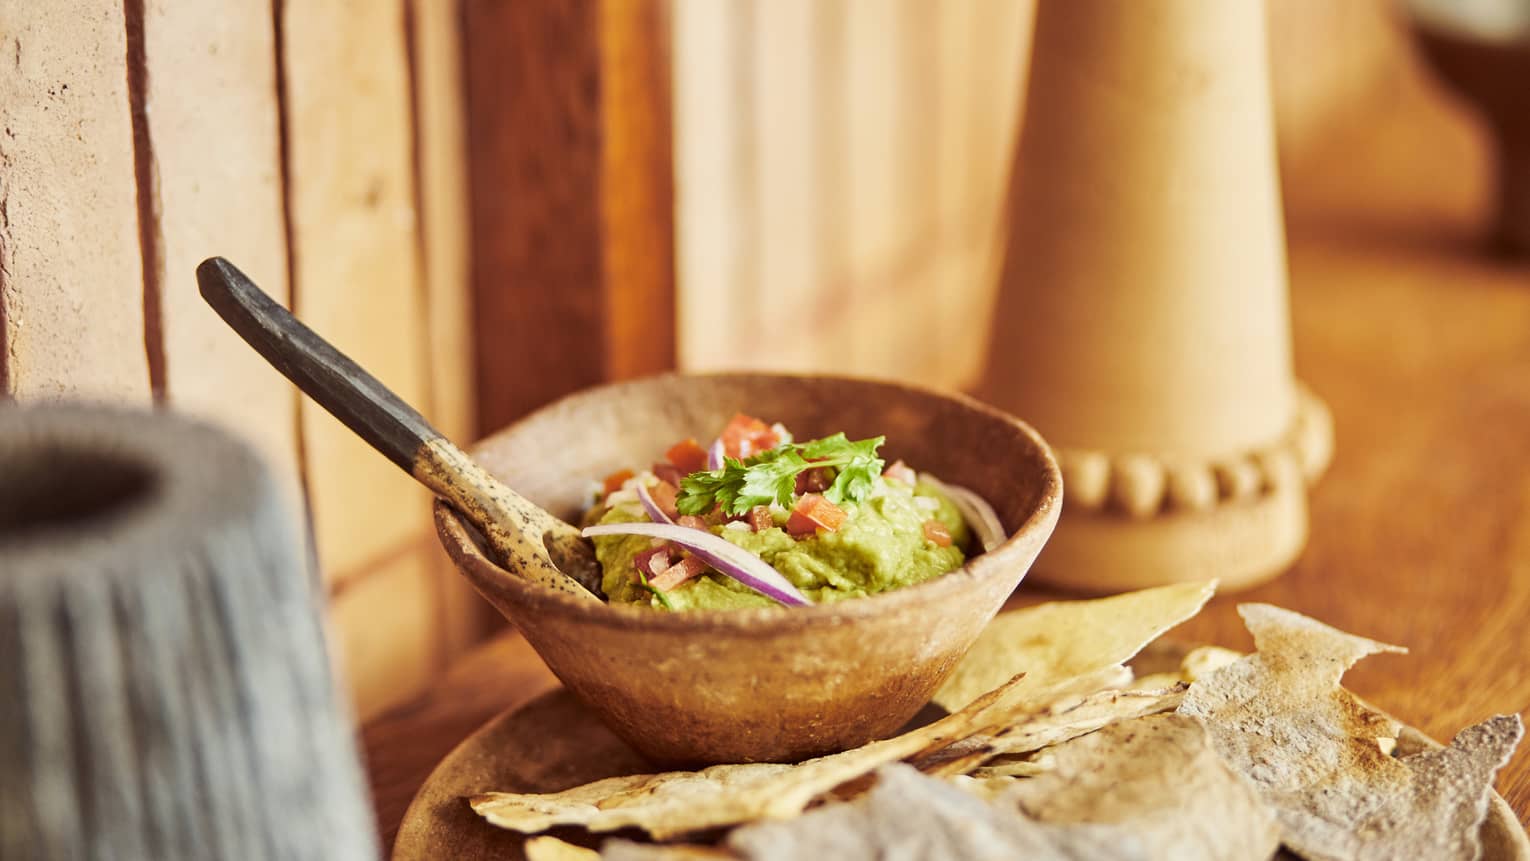 Home-made guacamole in a bowl.